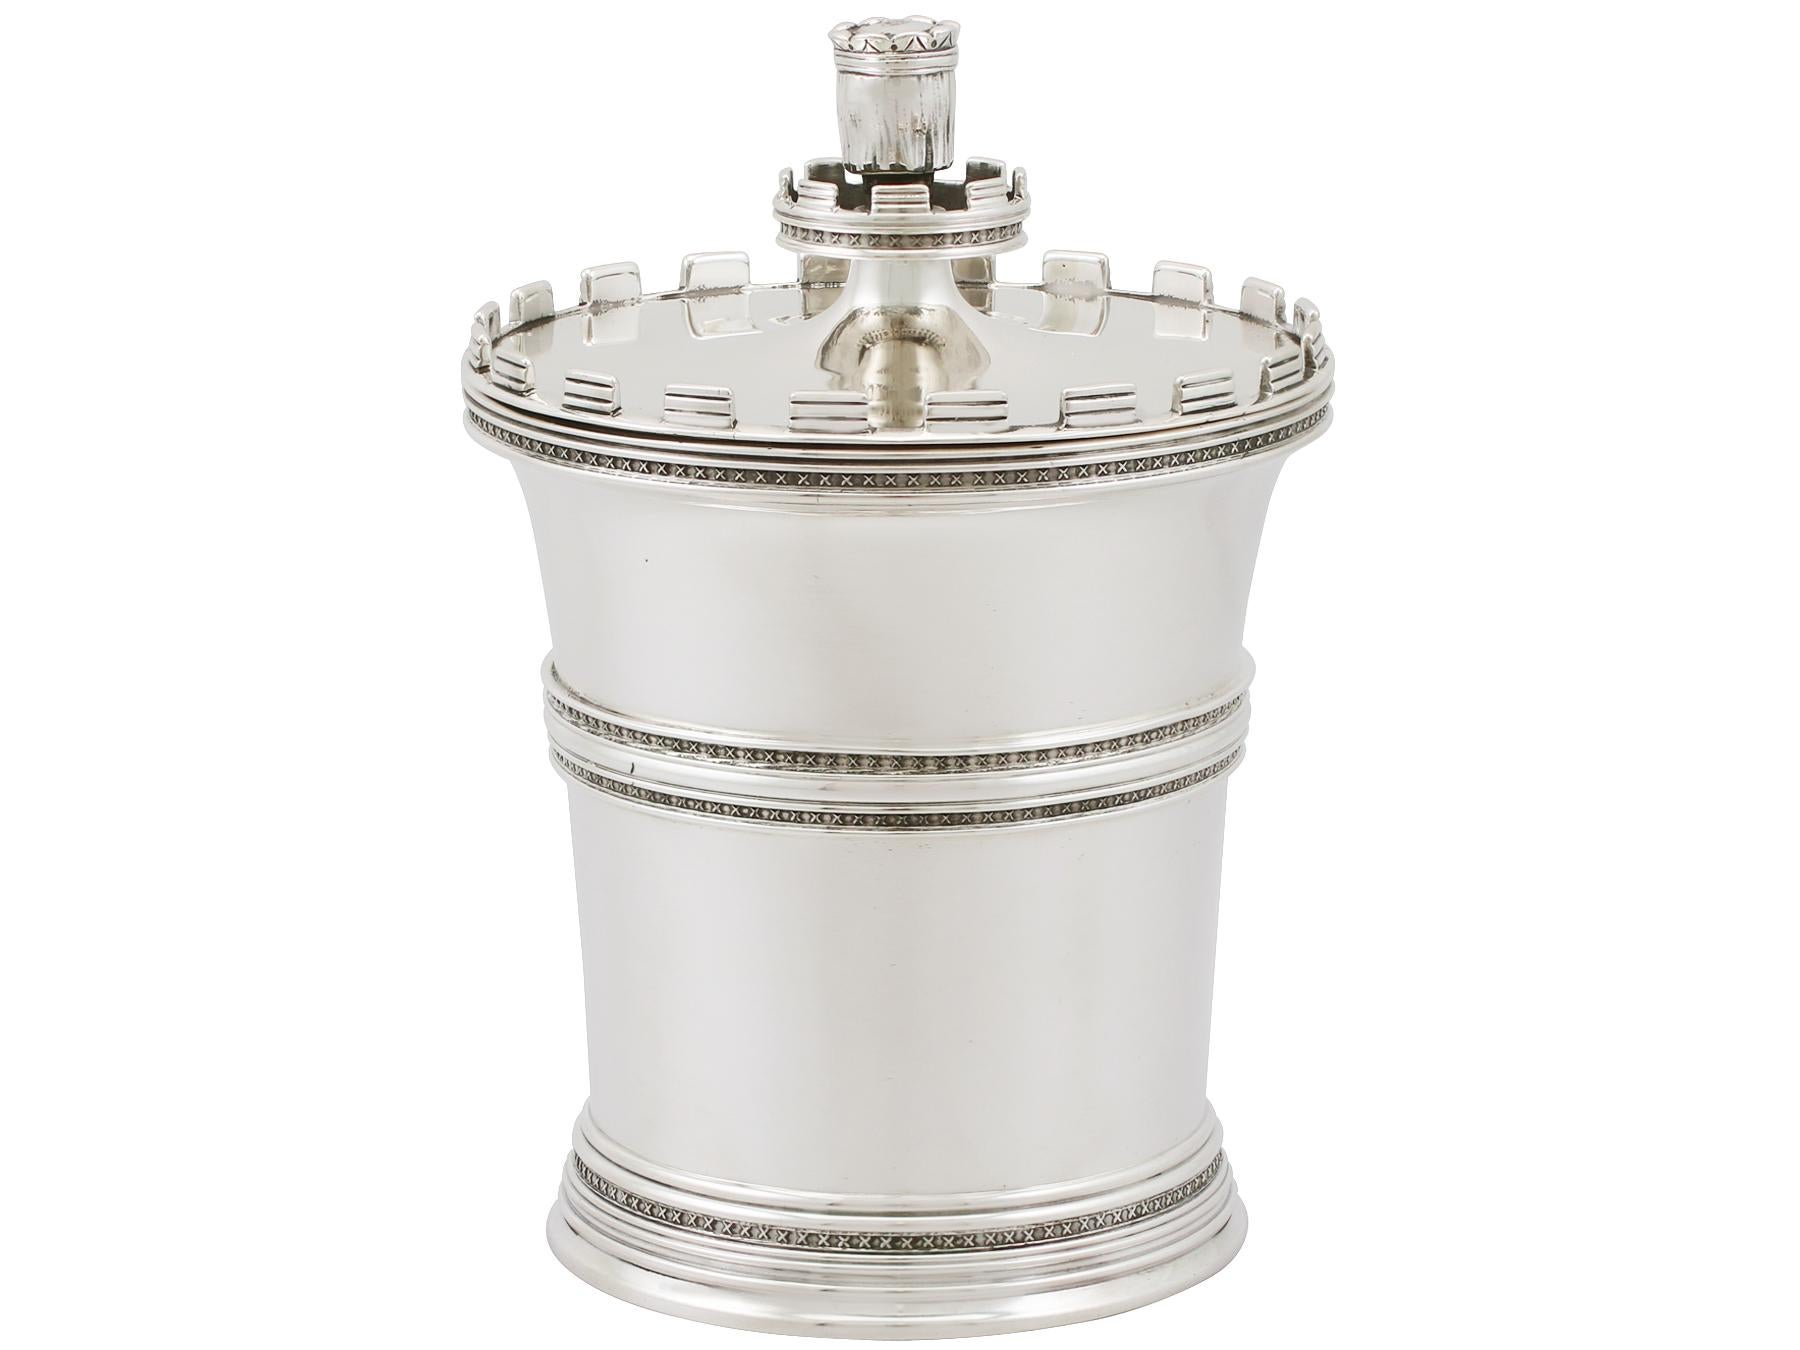 An exceptional, fine and impressive antique George V English sterling silver tea caddy; an addition to our 20th century silverware collection.

This exceptional antique George V sterling silver tea caddy has a tapering cylindrical form.

The surface